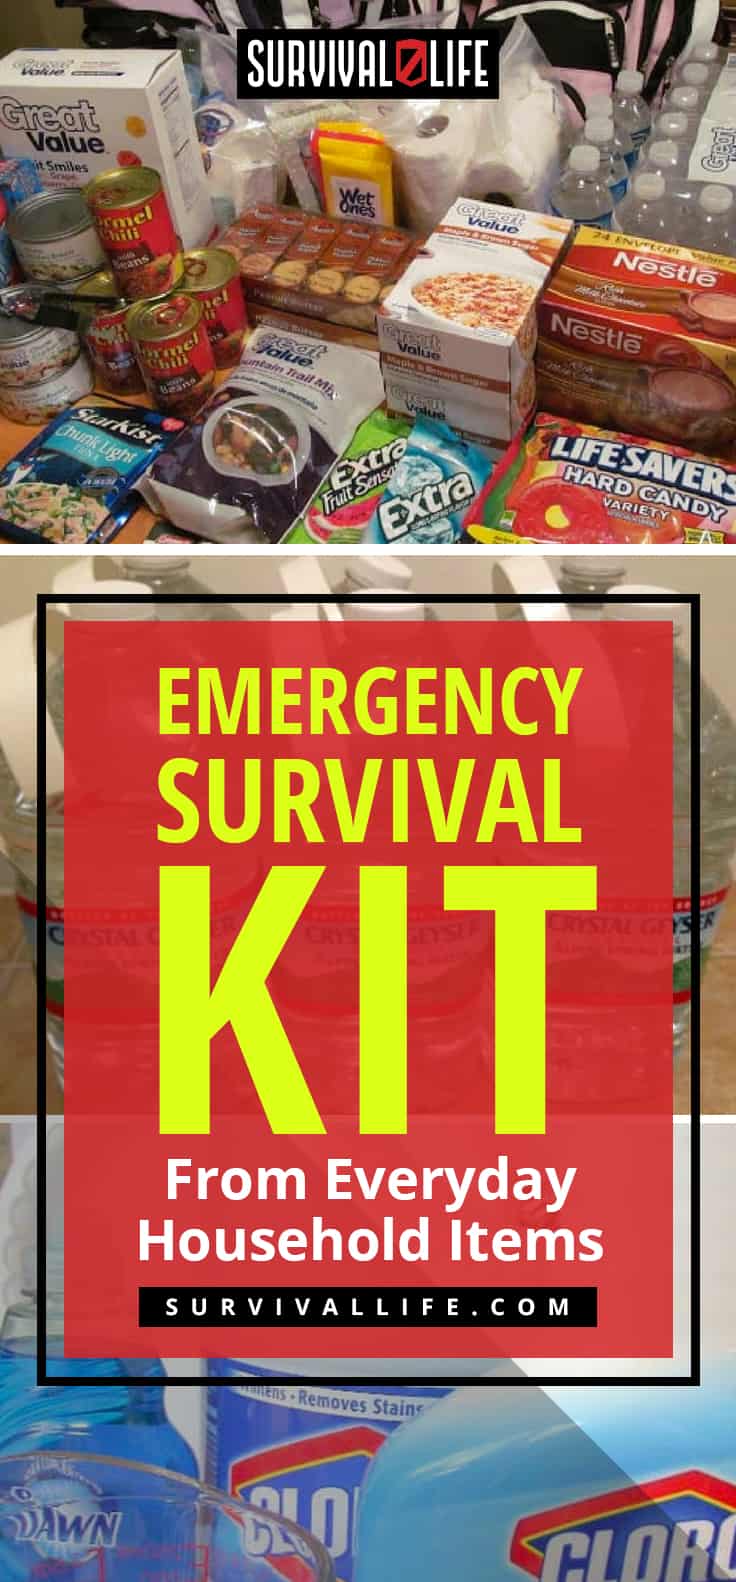 Emergency Survival Kit From Everyday Household Items